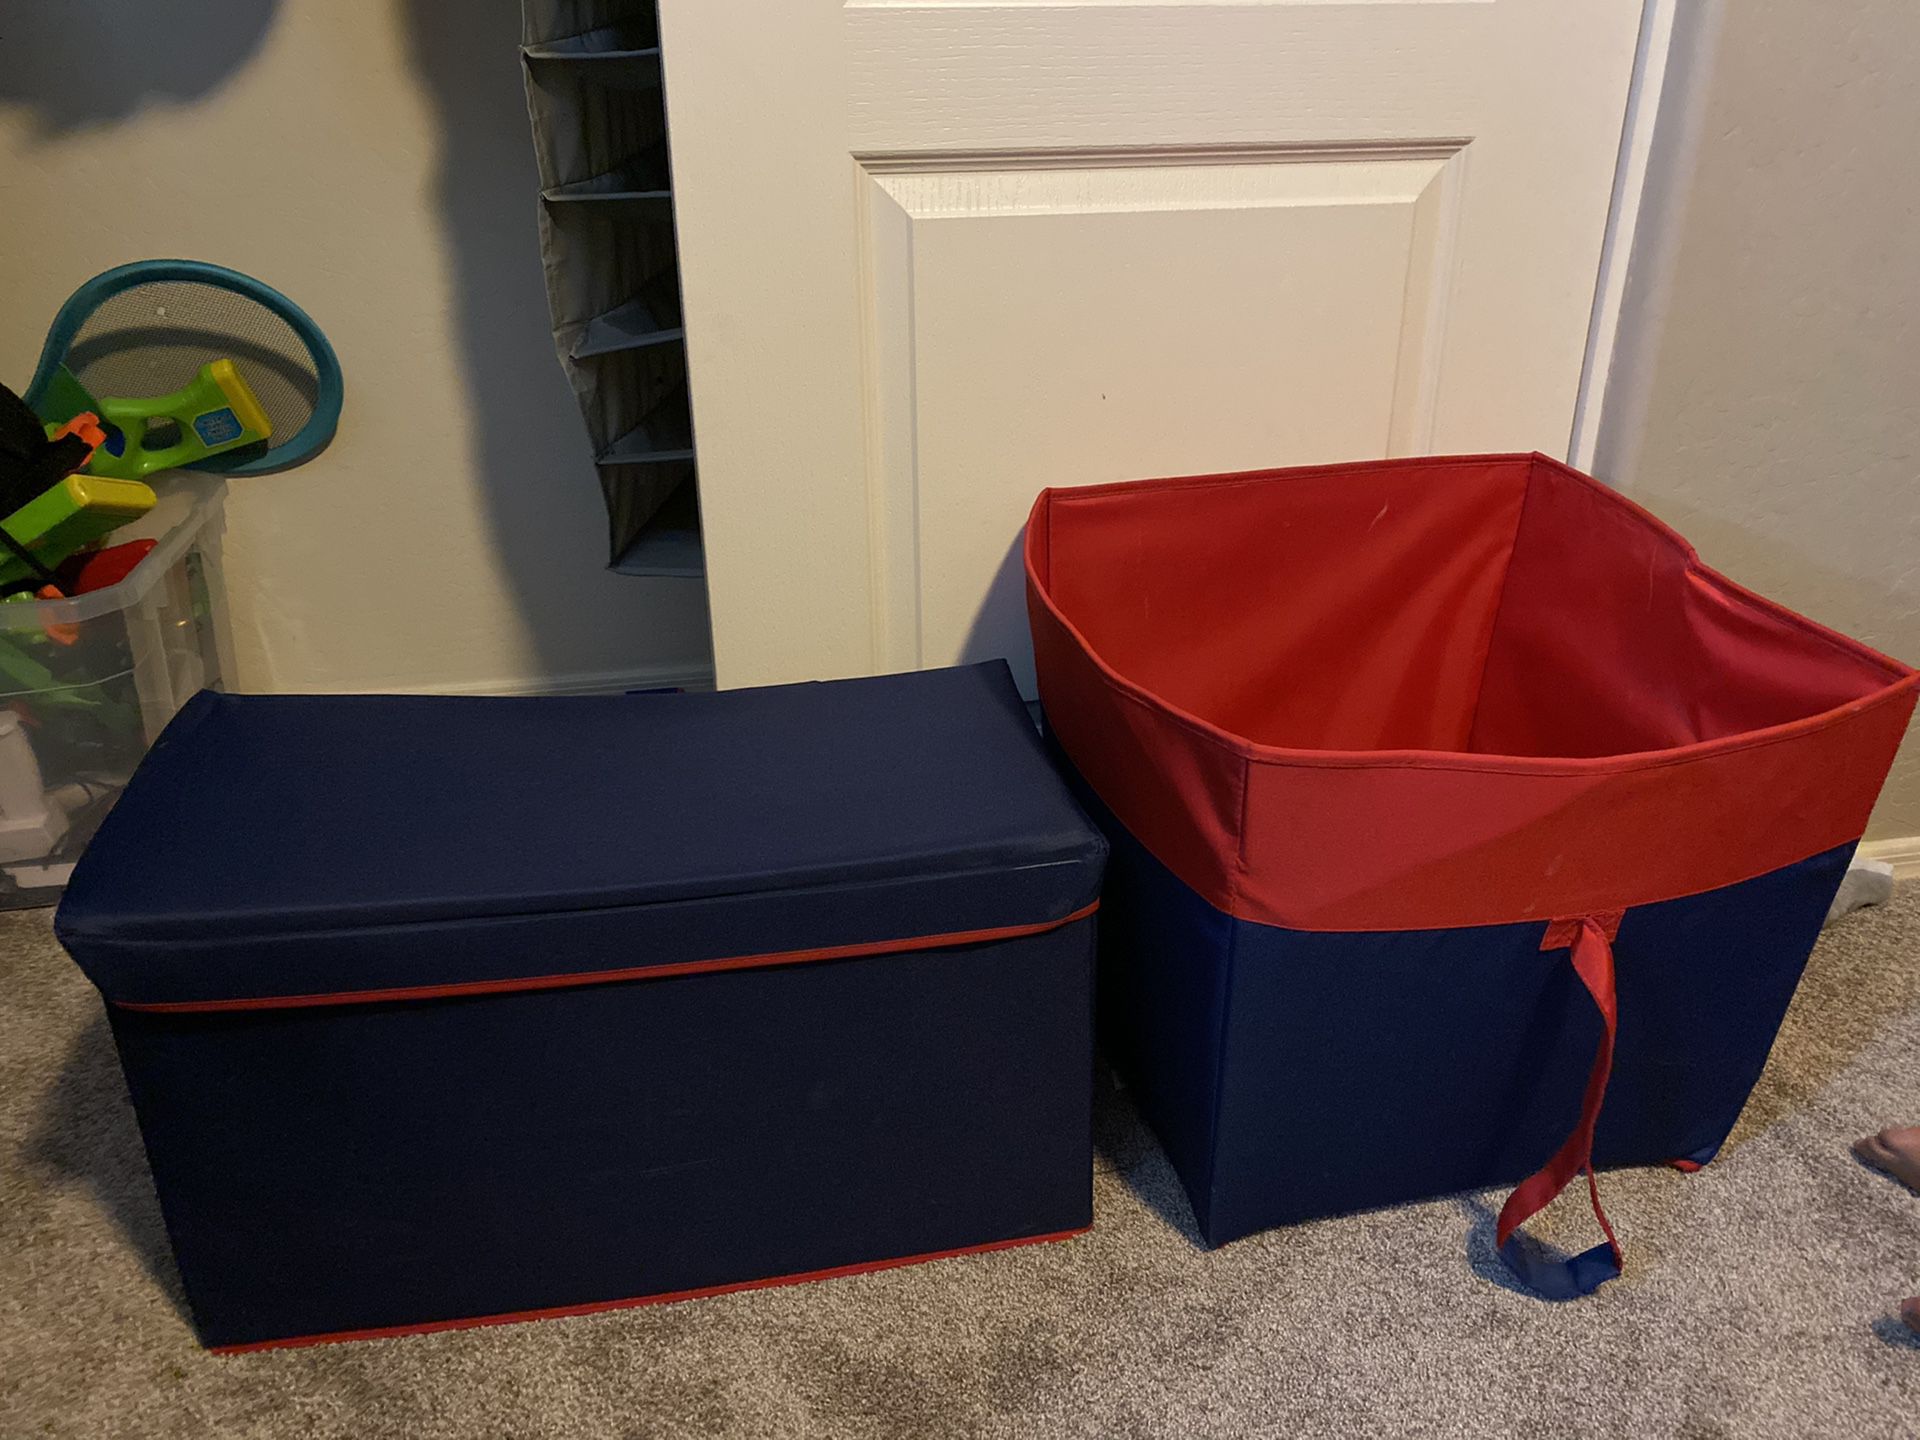 Collapsible kids storage /toy box.